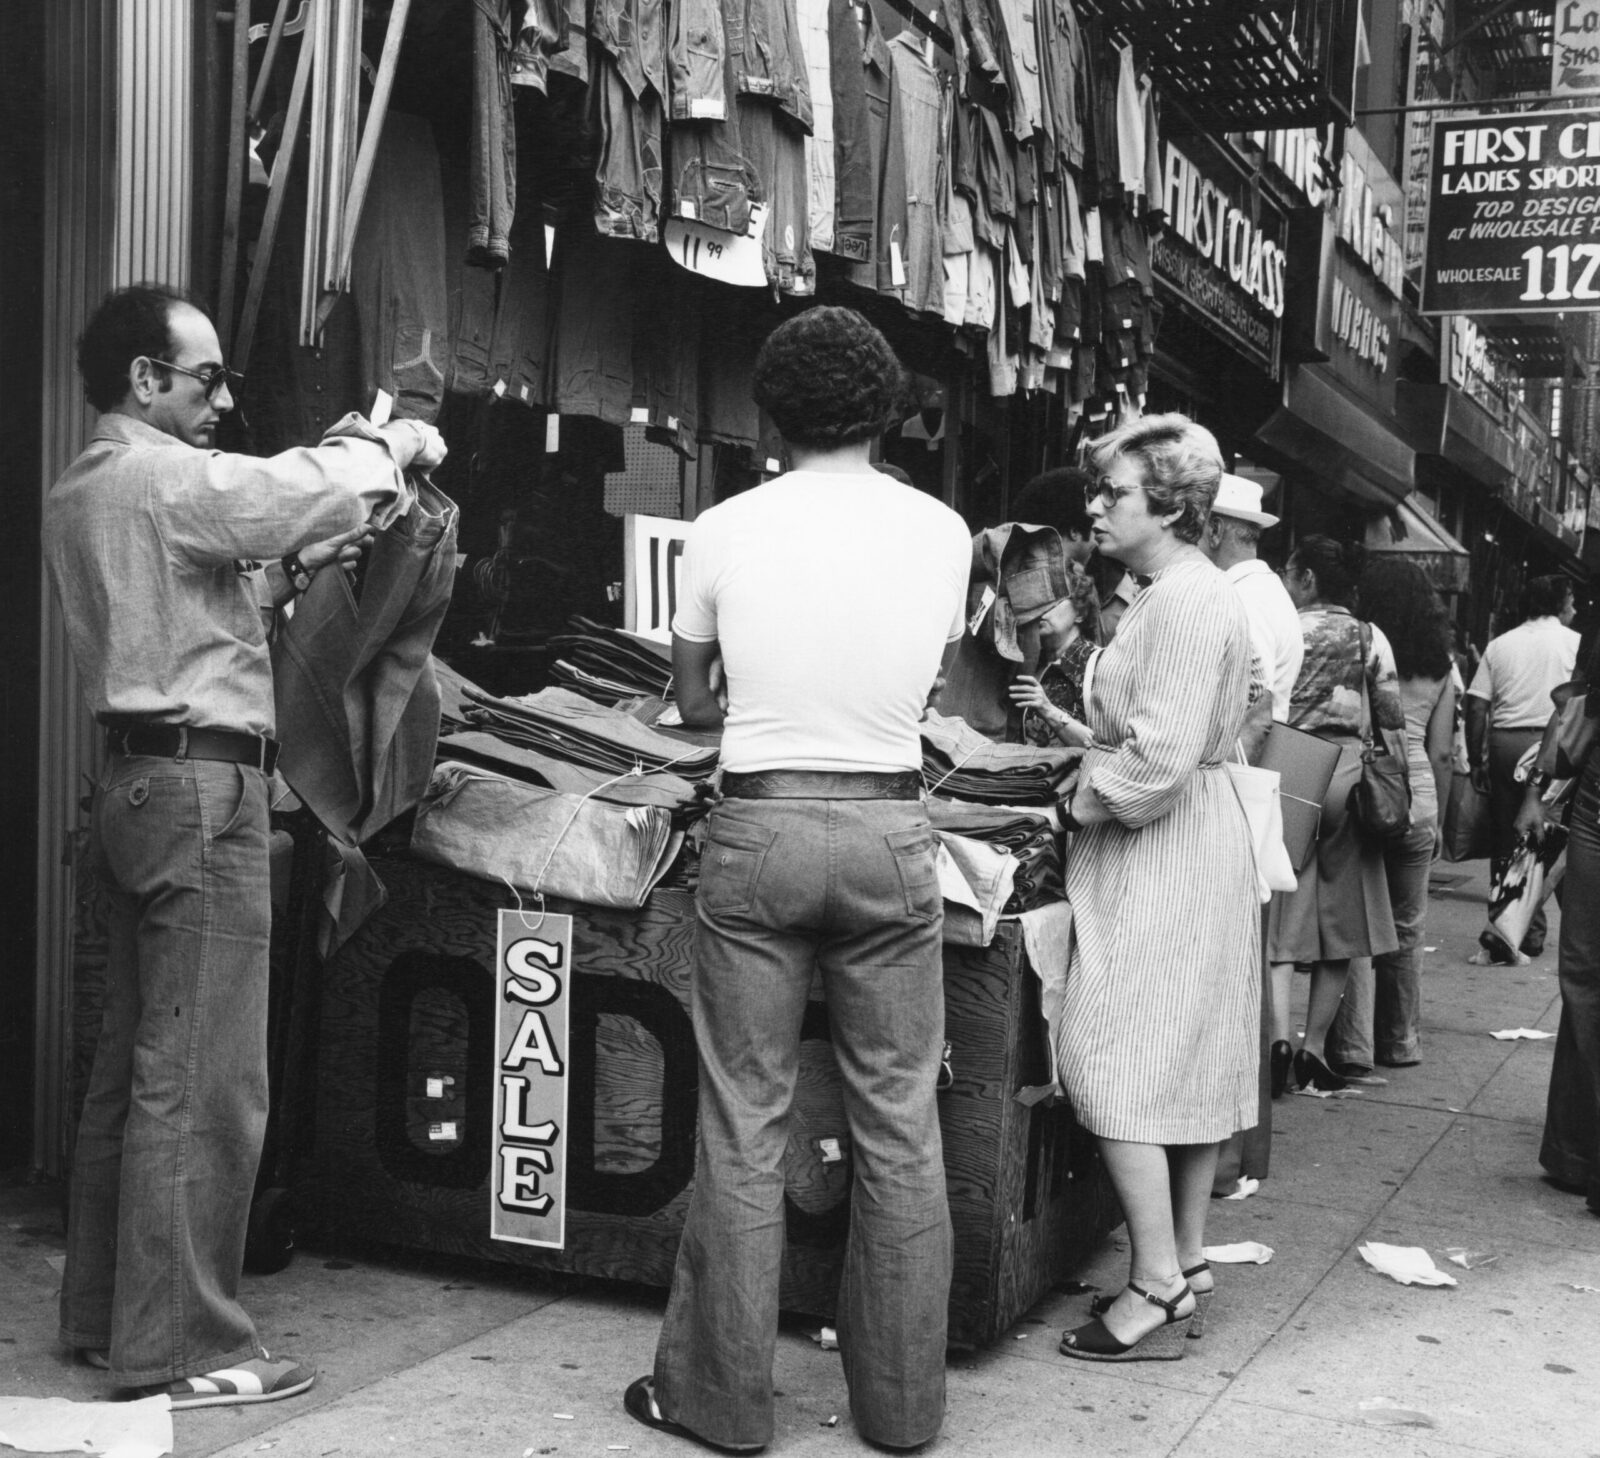 Black and white photograph of people shopping for pants outside the storefront of a Lower East Side clothing store. Tables sit on the sidewalk with merchandise.